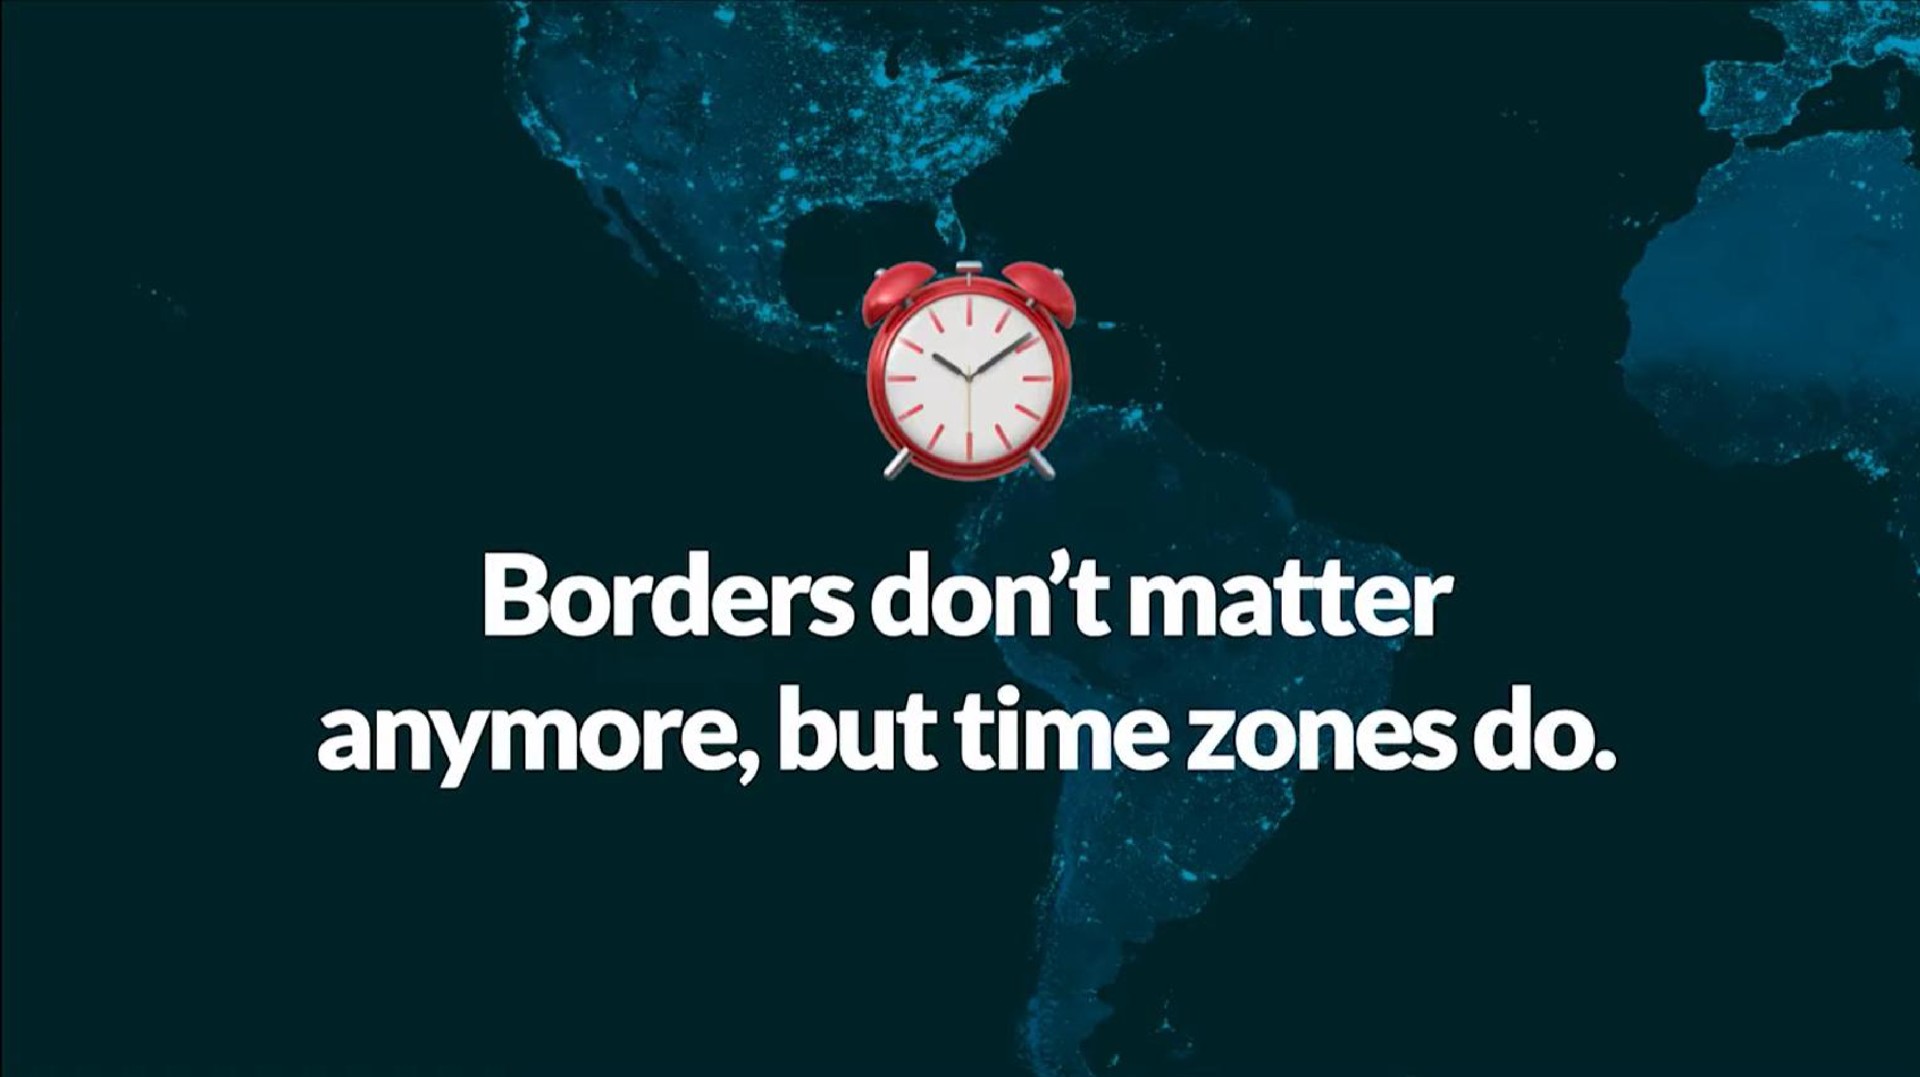 a borders don matter but time zones do | Getonboard